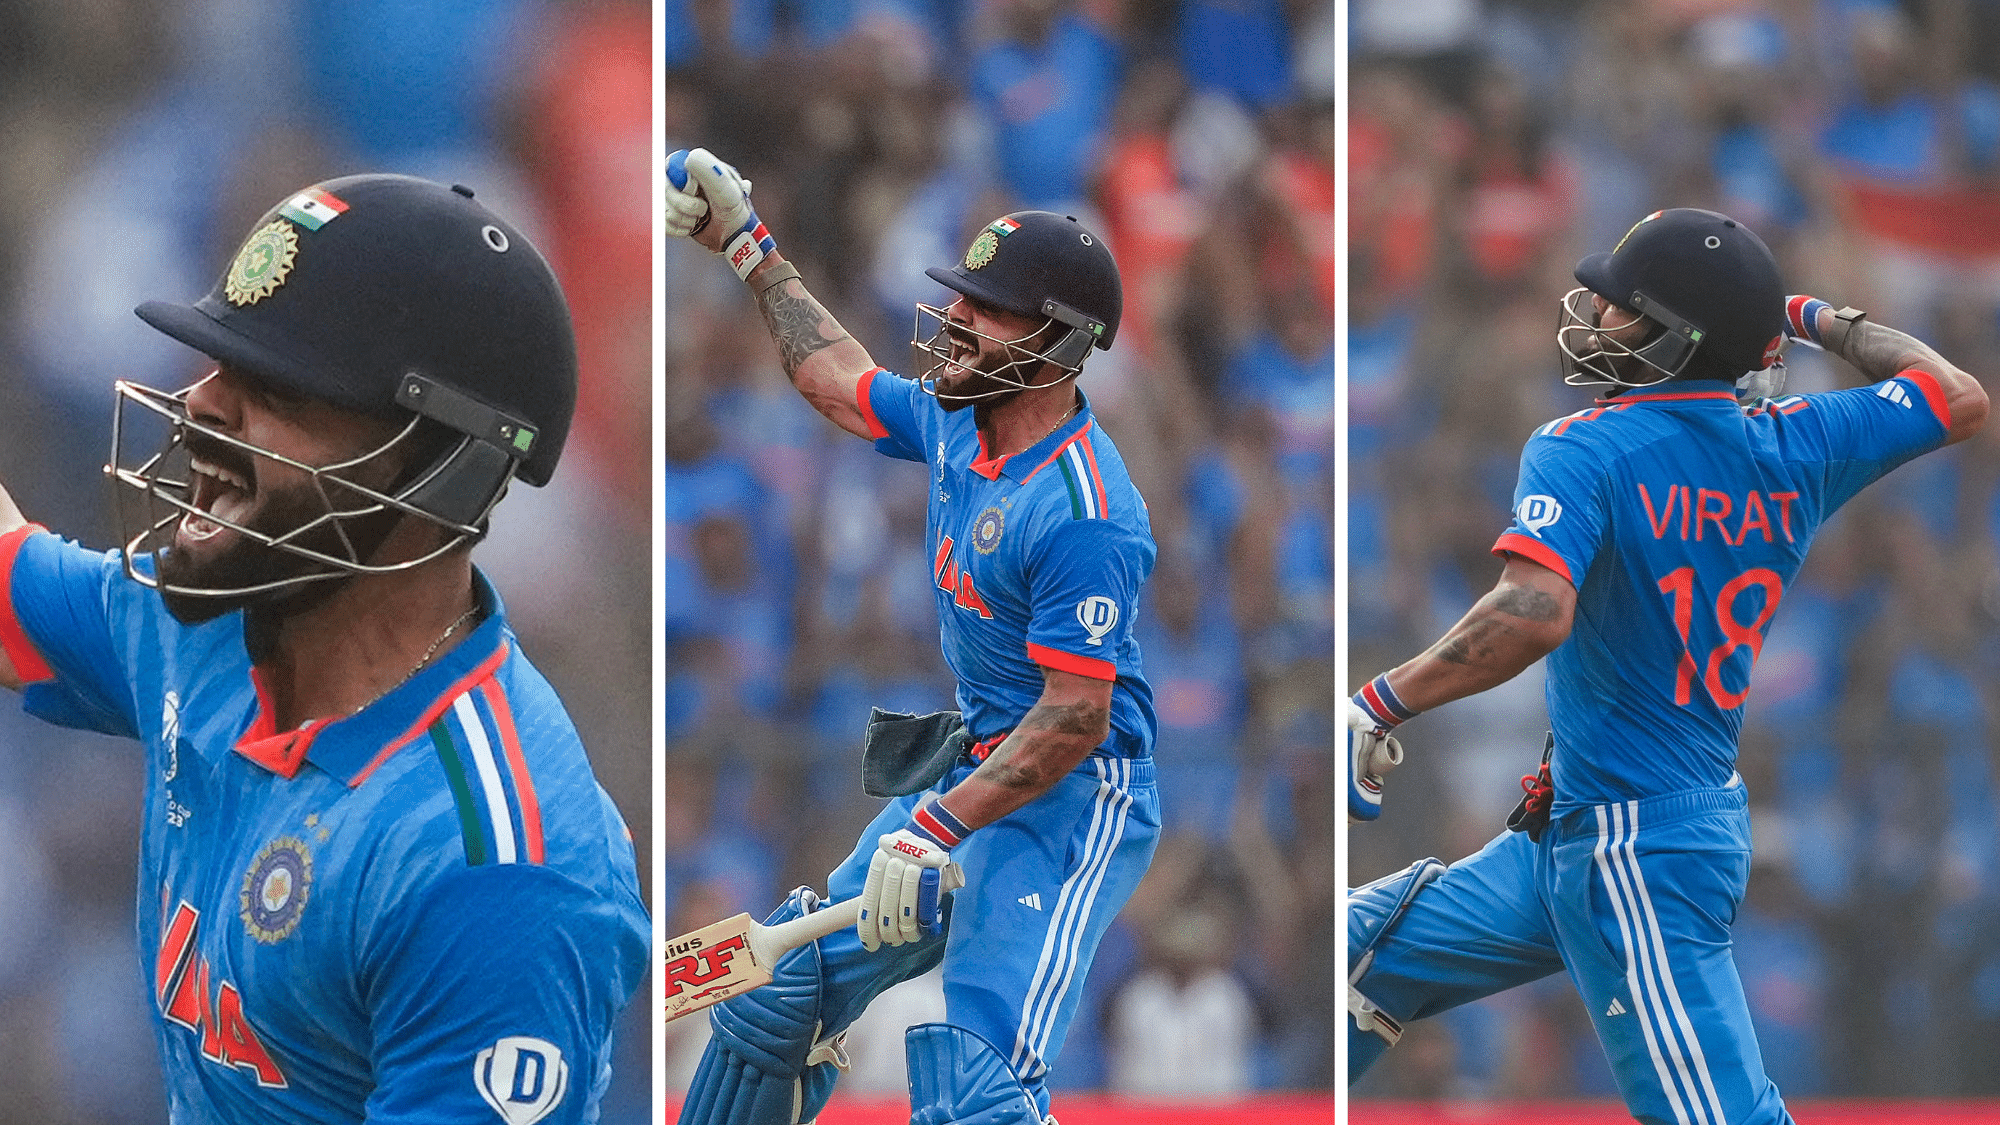 <div class="paragraphs"><p>Virat Kohli scored his 50th ODI century to become the first player to achieve the mark.</p></div>